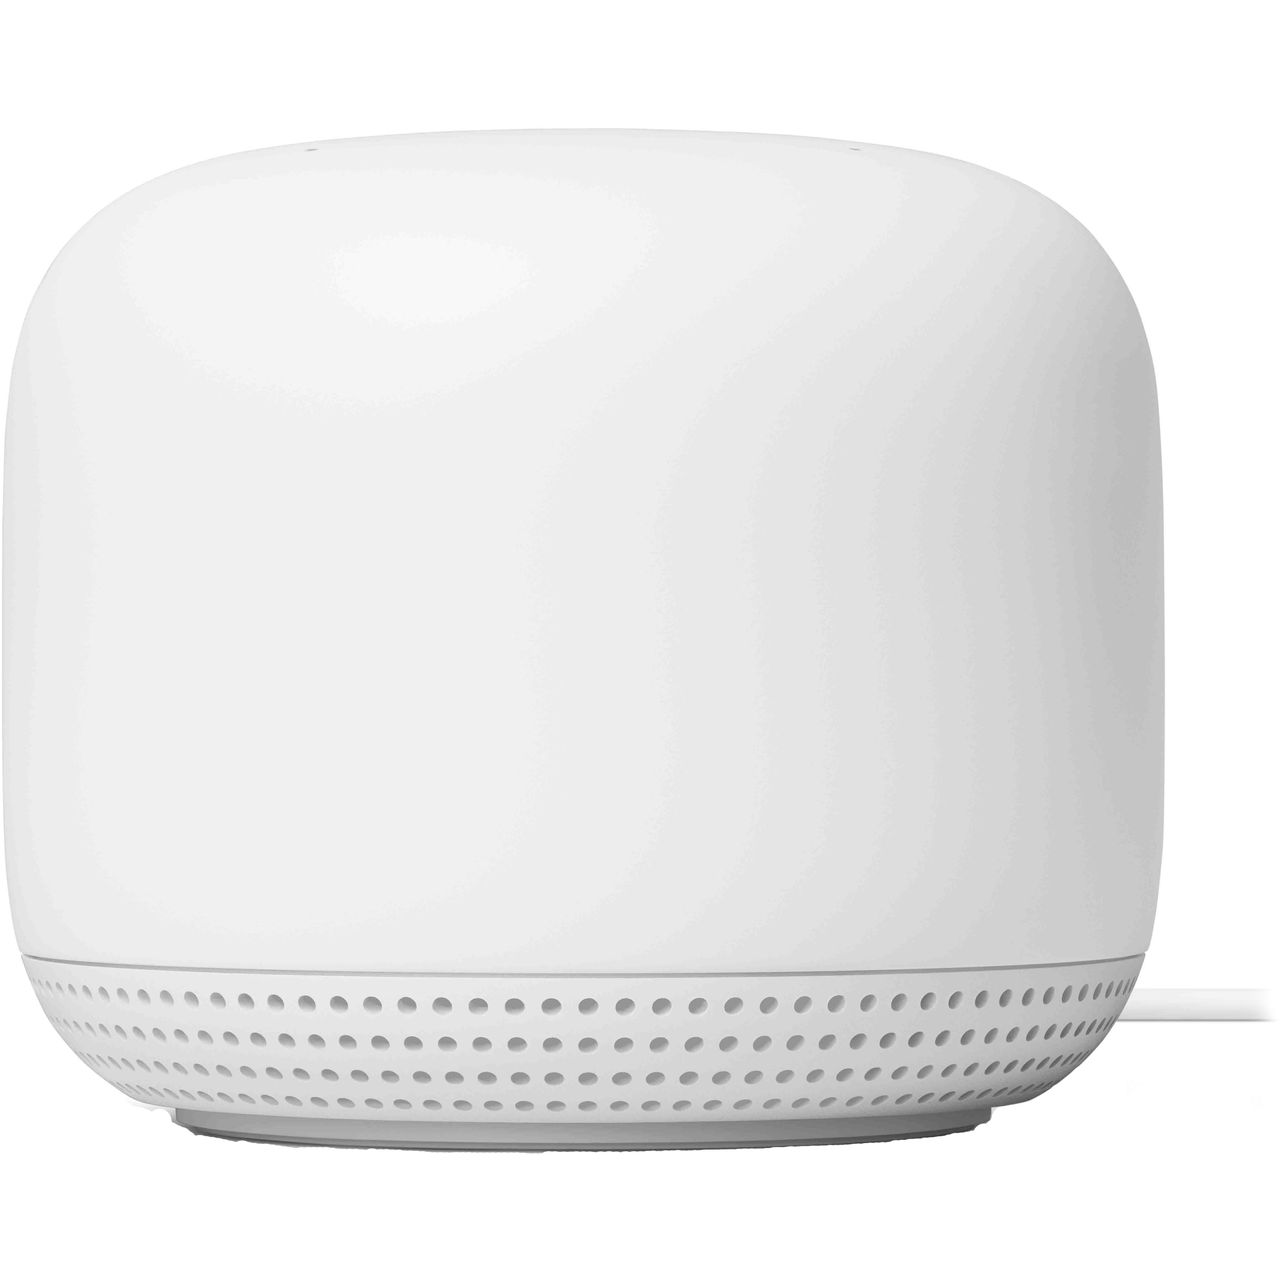 Google Nest WiFi Point Review